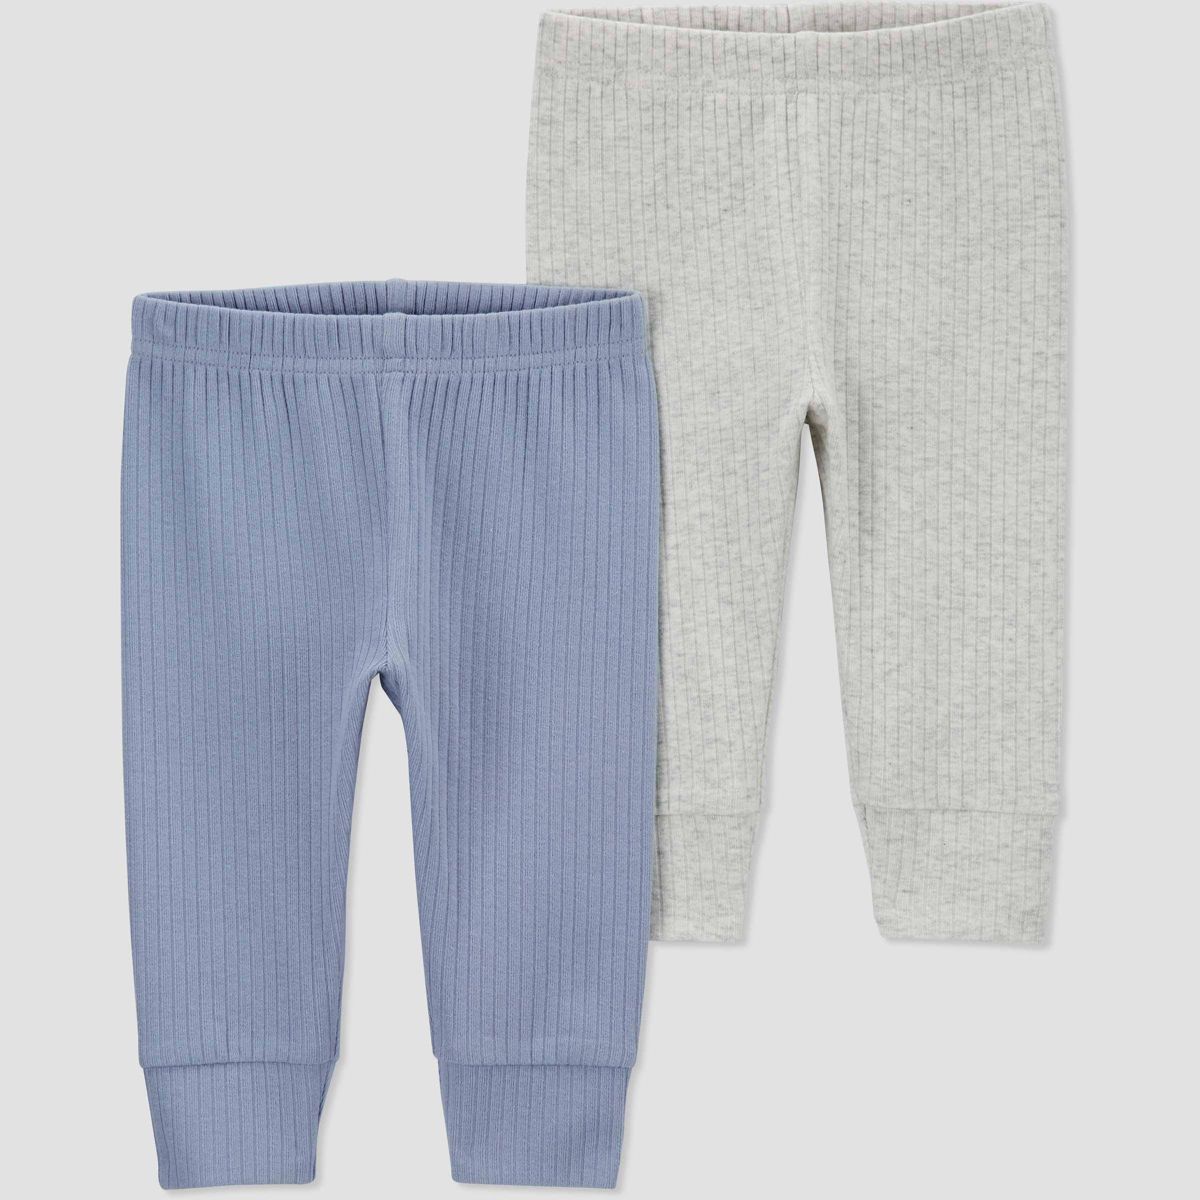 Carter's Just One You® Baby Boys' 2pk Pants - Blue/Gray | Target